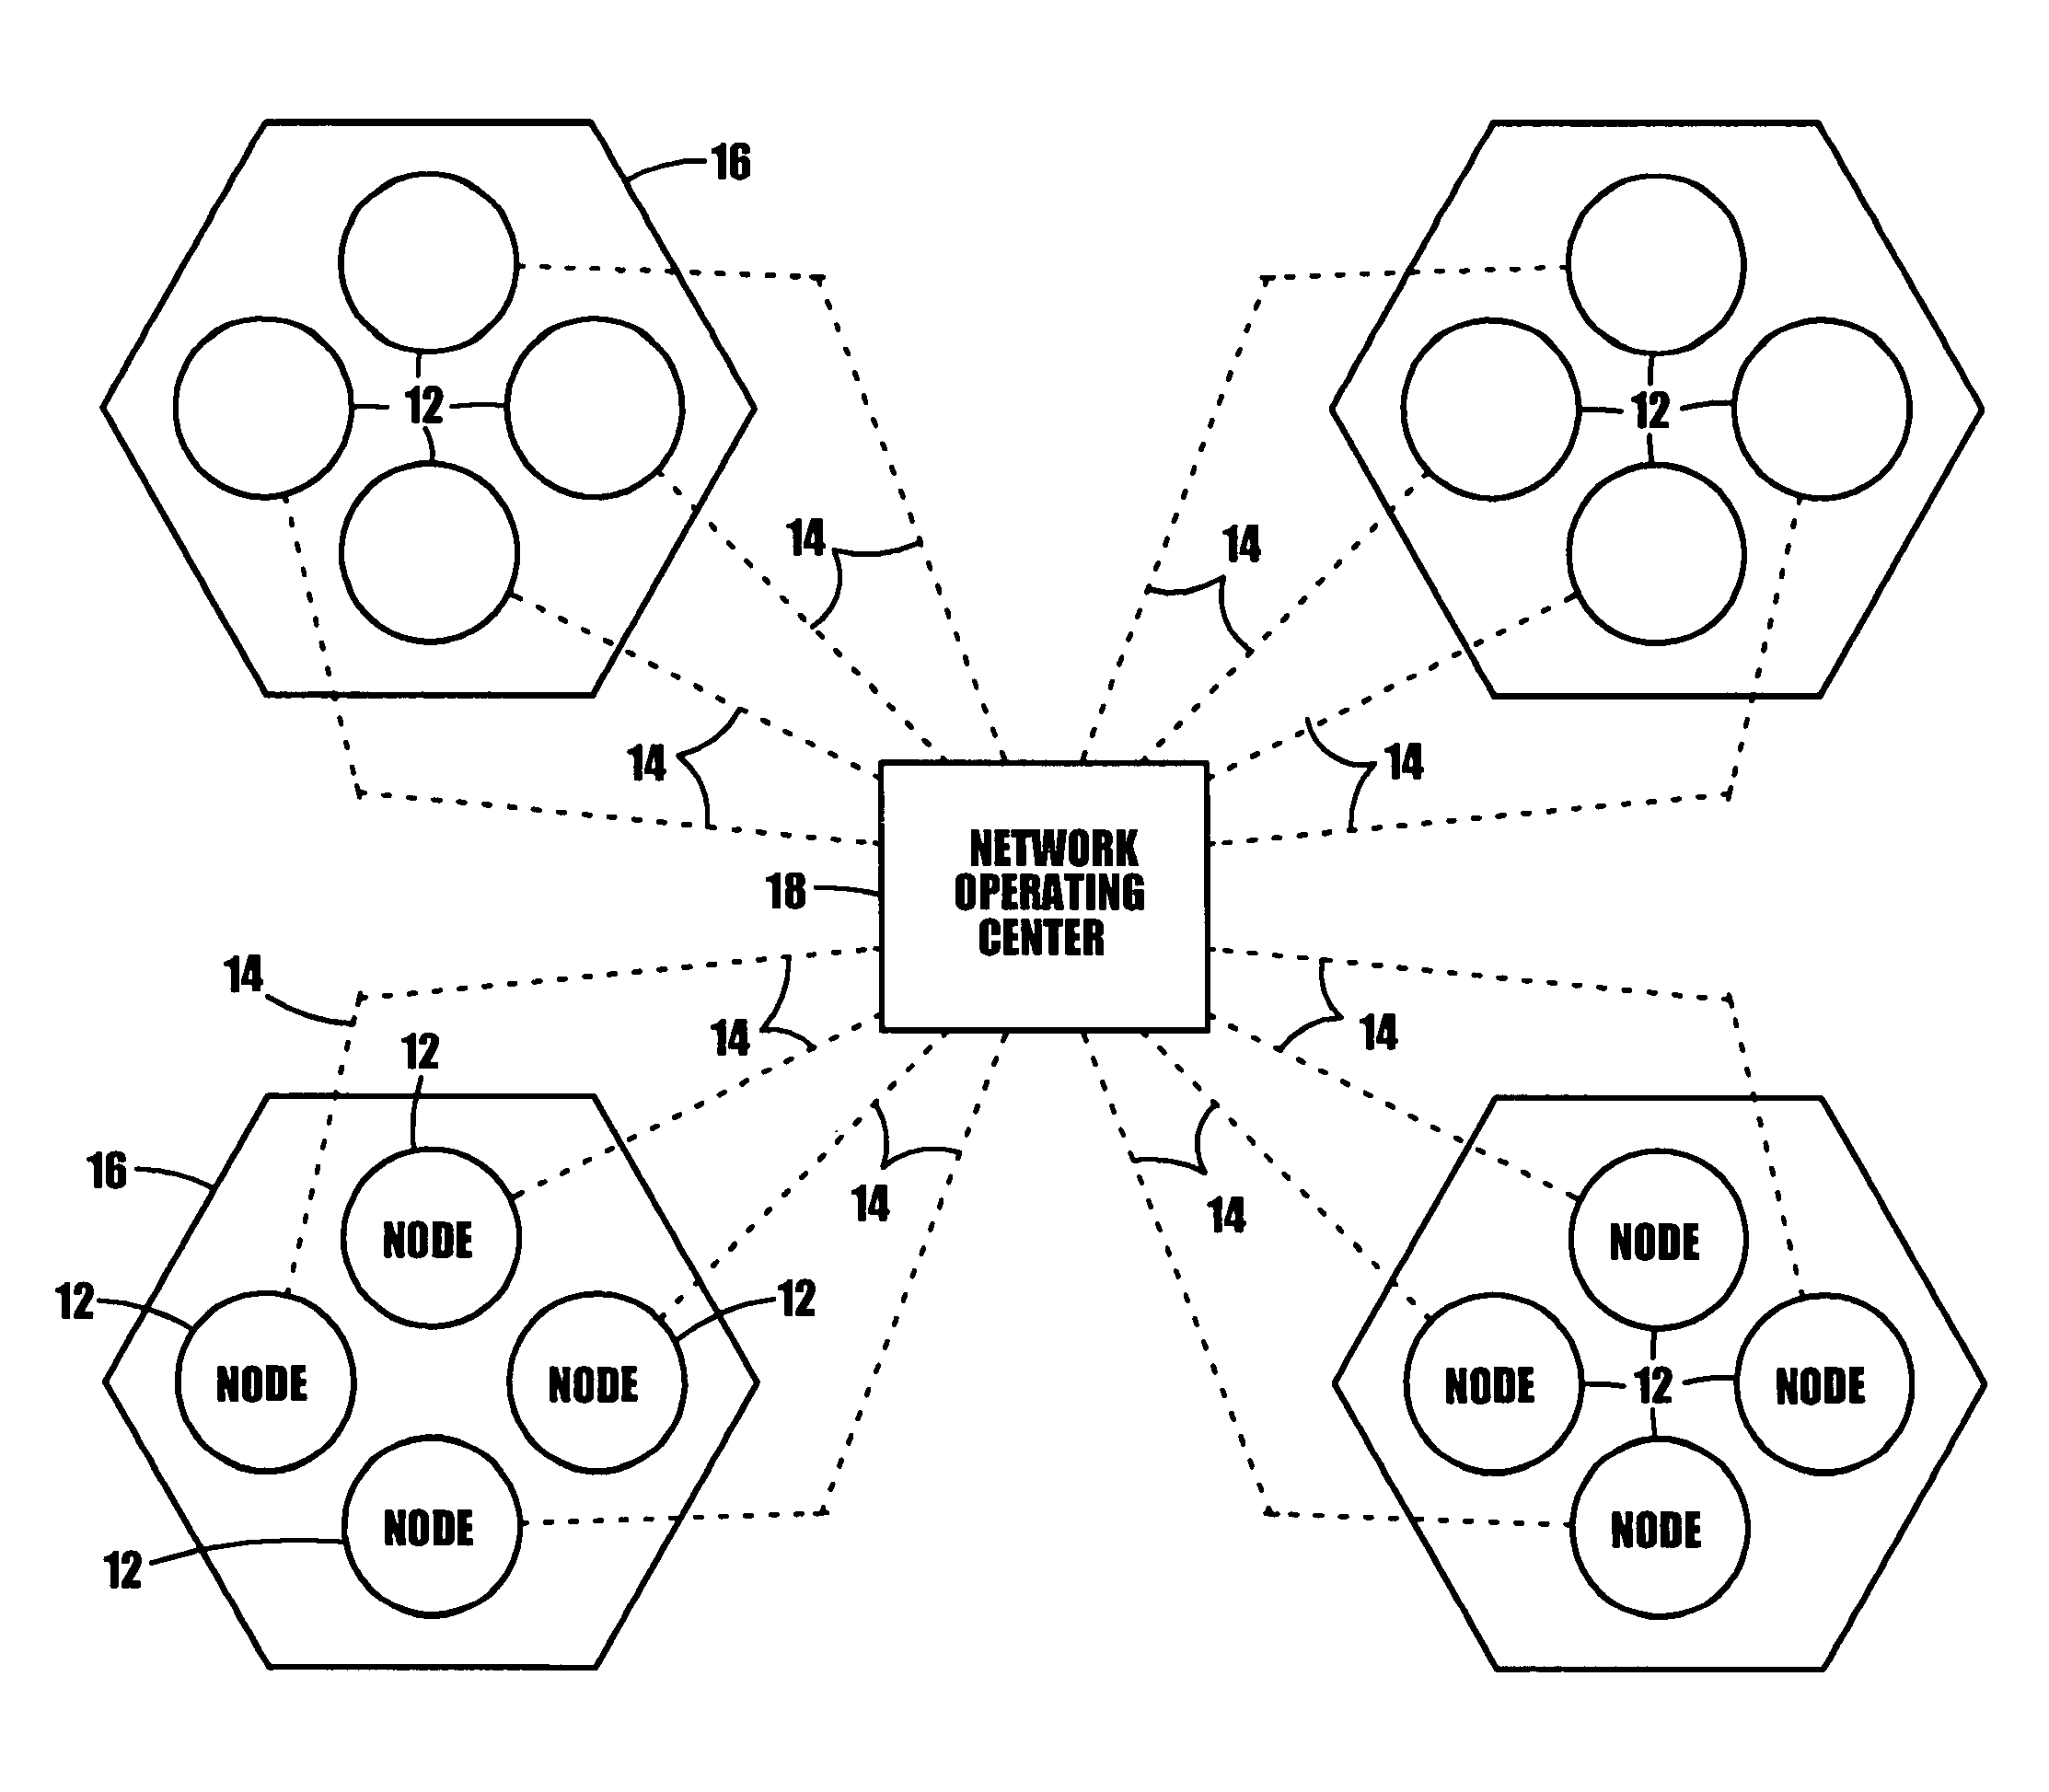 System and method for creating and operating an enhanced distributed energy network or virtual power plant